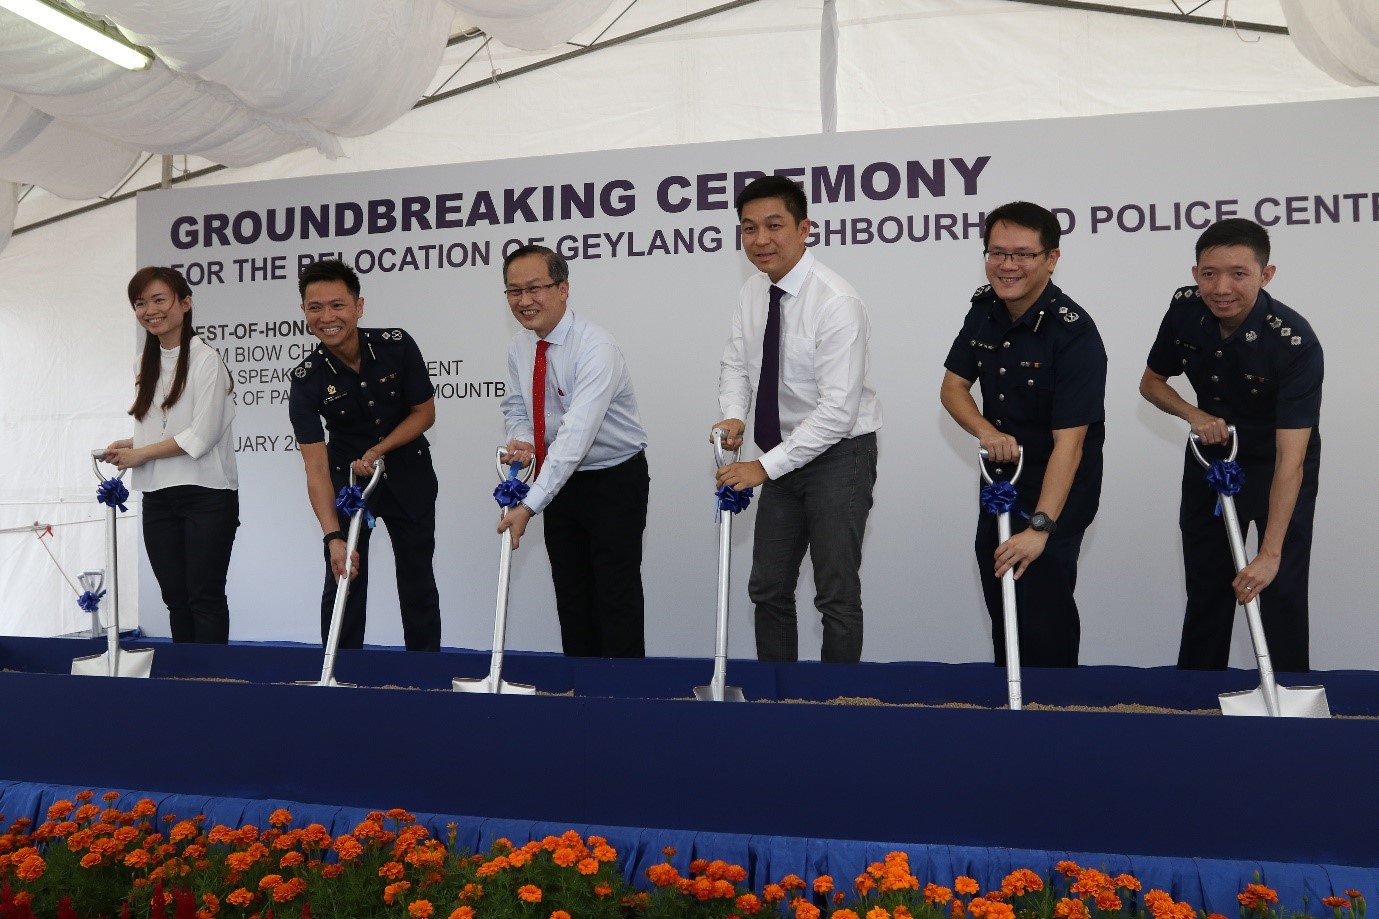 20180204_others_ground_breaking_ceremony_reolcation_geylang_npc_others1